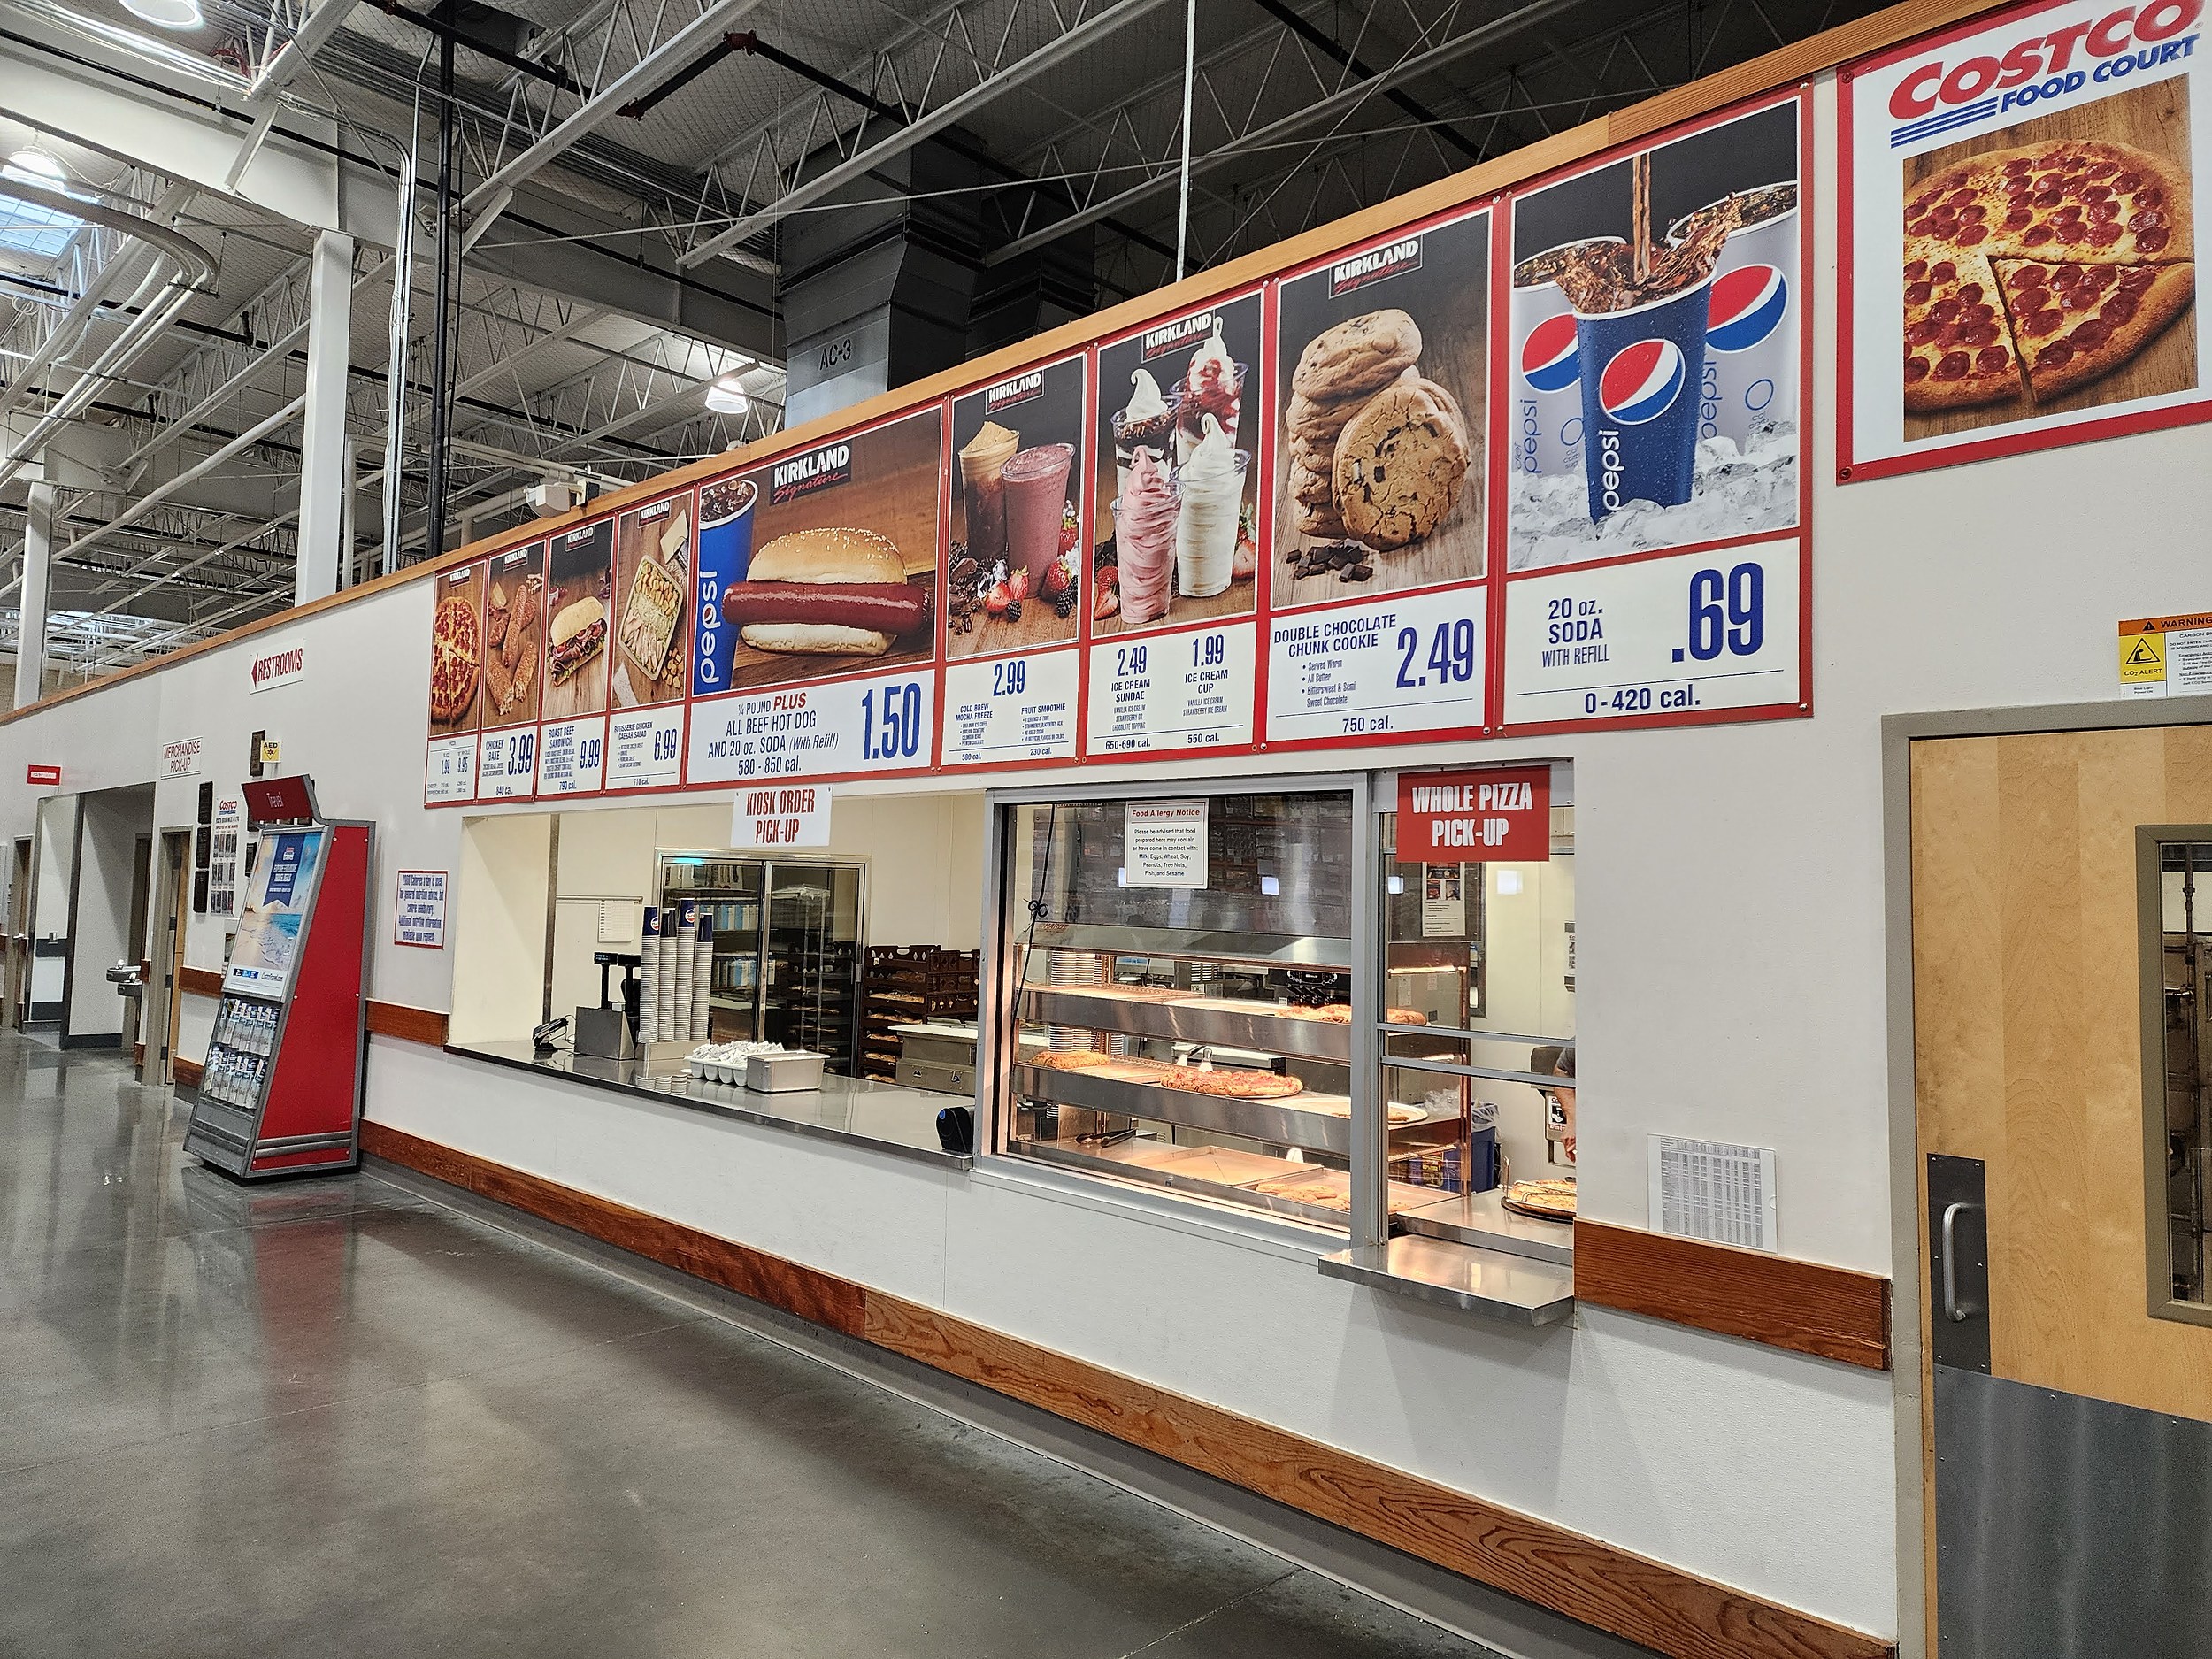 Churro out, cookie in: NJ Costco fans shocked by menu change